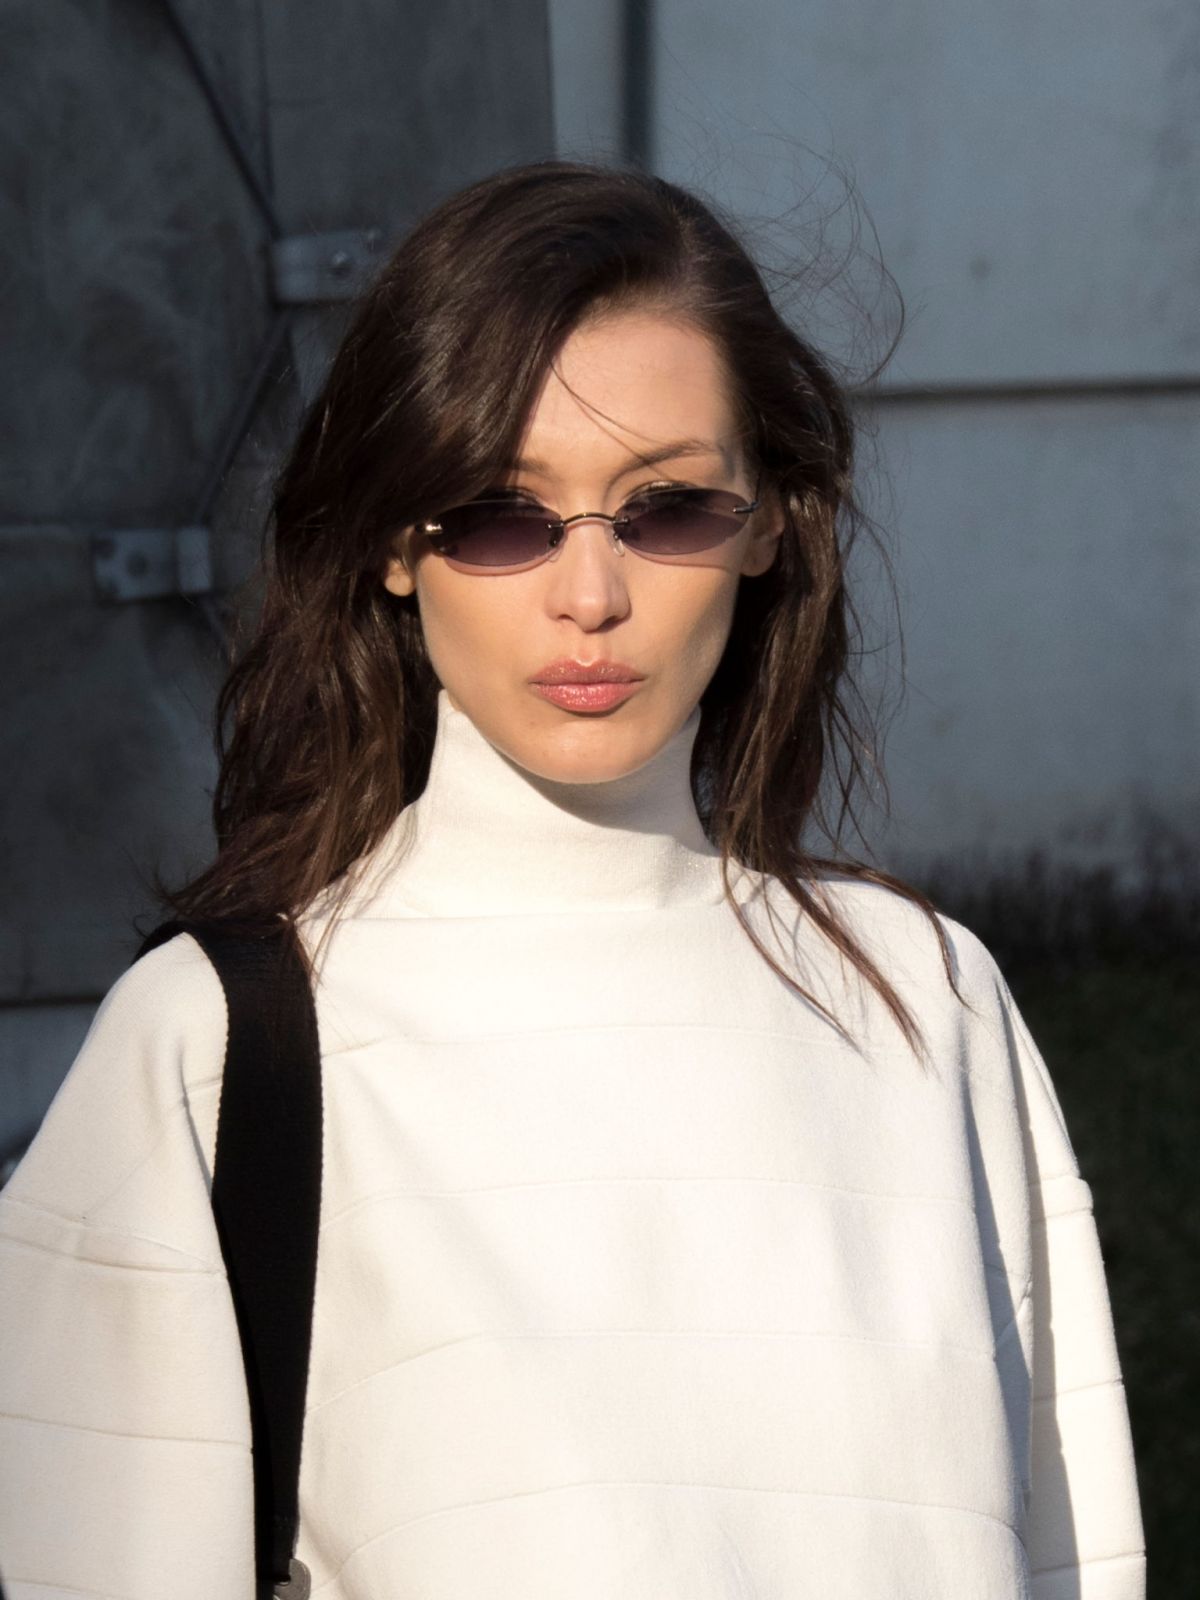 bella-hadid-out-and-about-in-milan-02-23-2019-1.jpg